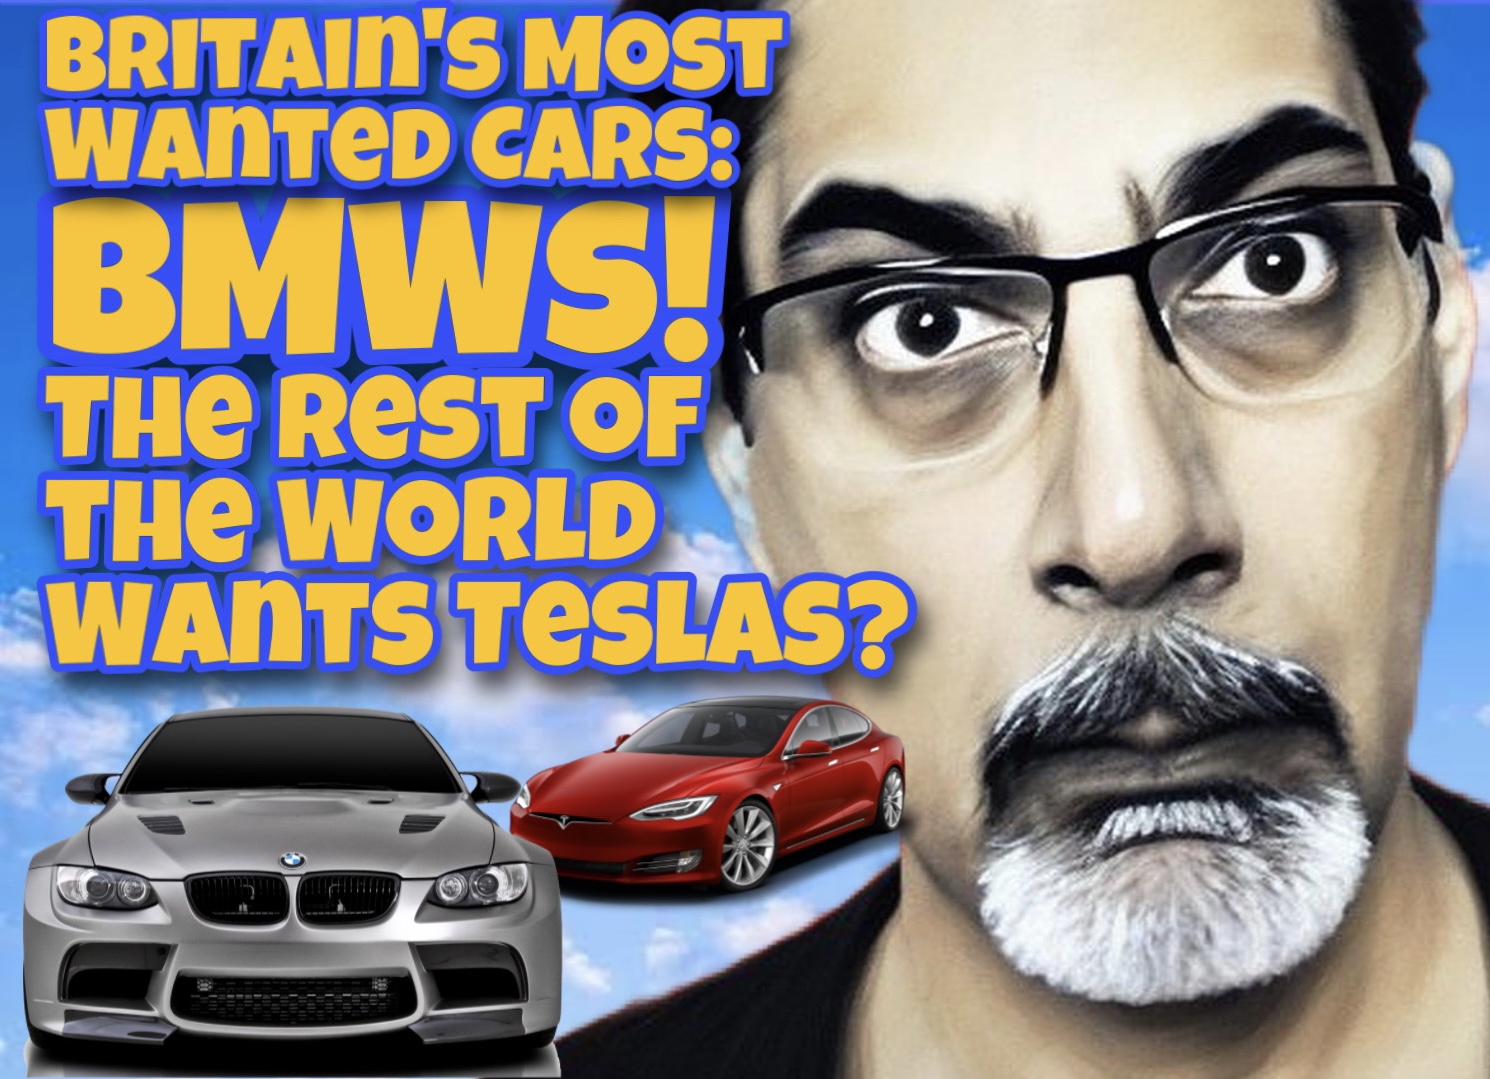 Britain’s Most Wanted Cars are BMWs! – Brown Car Guy